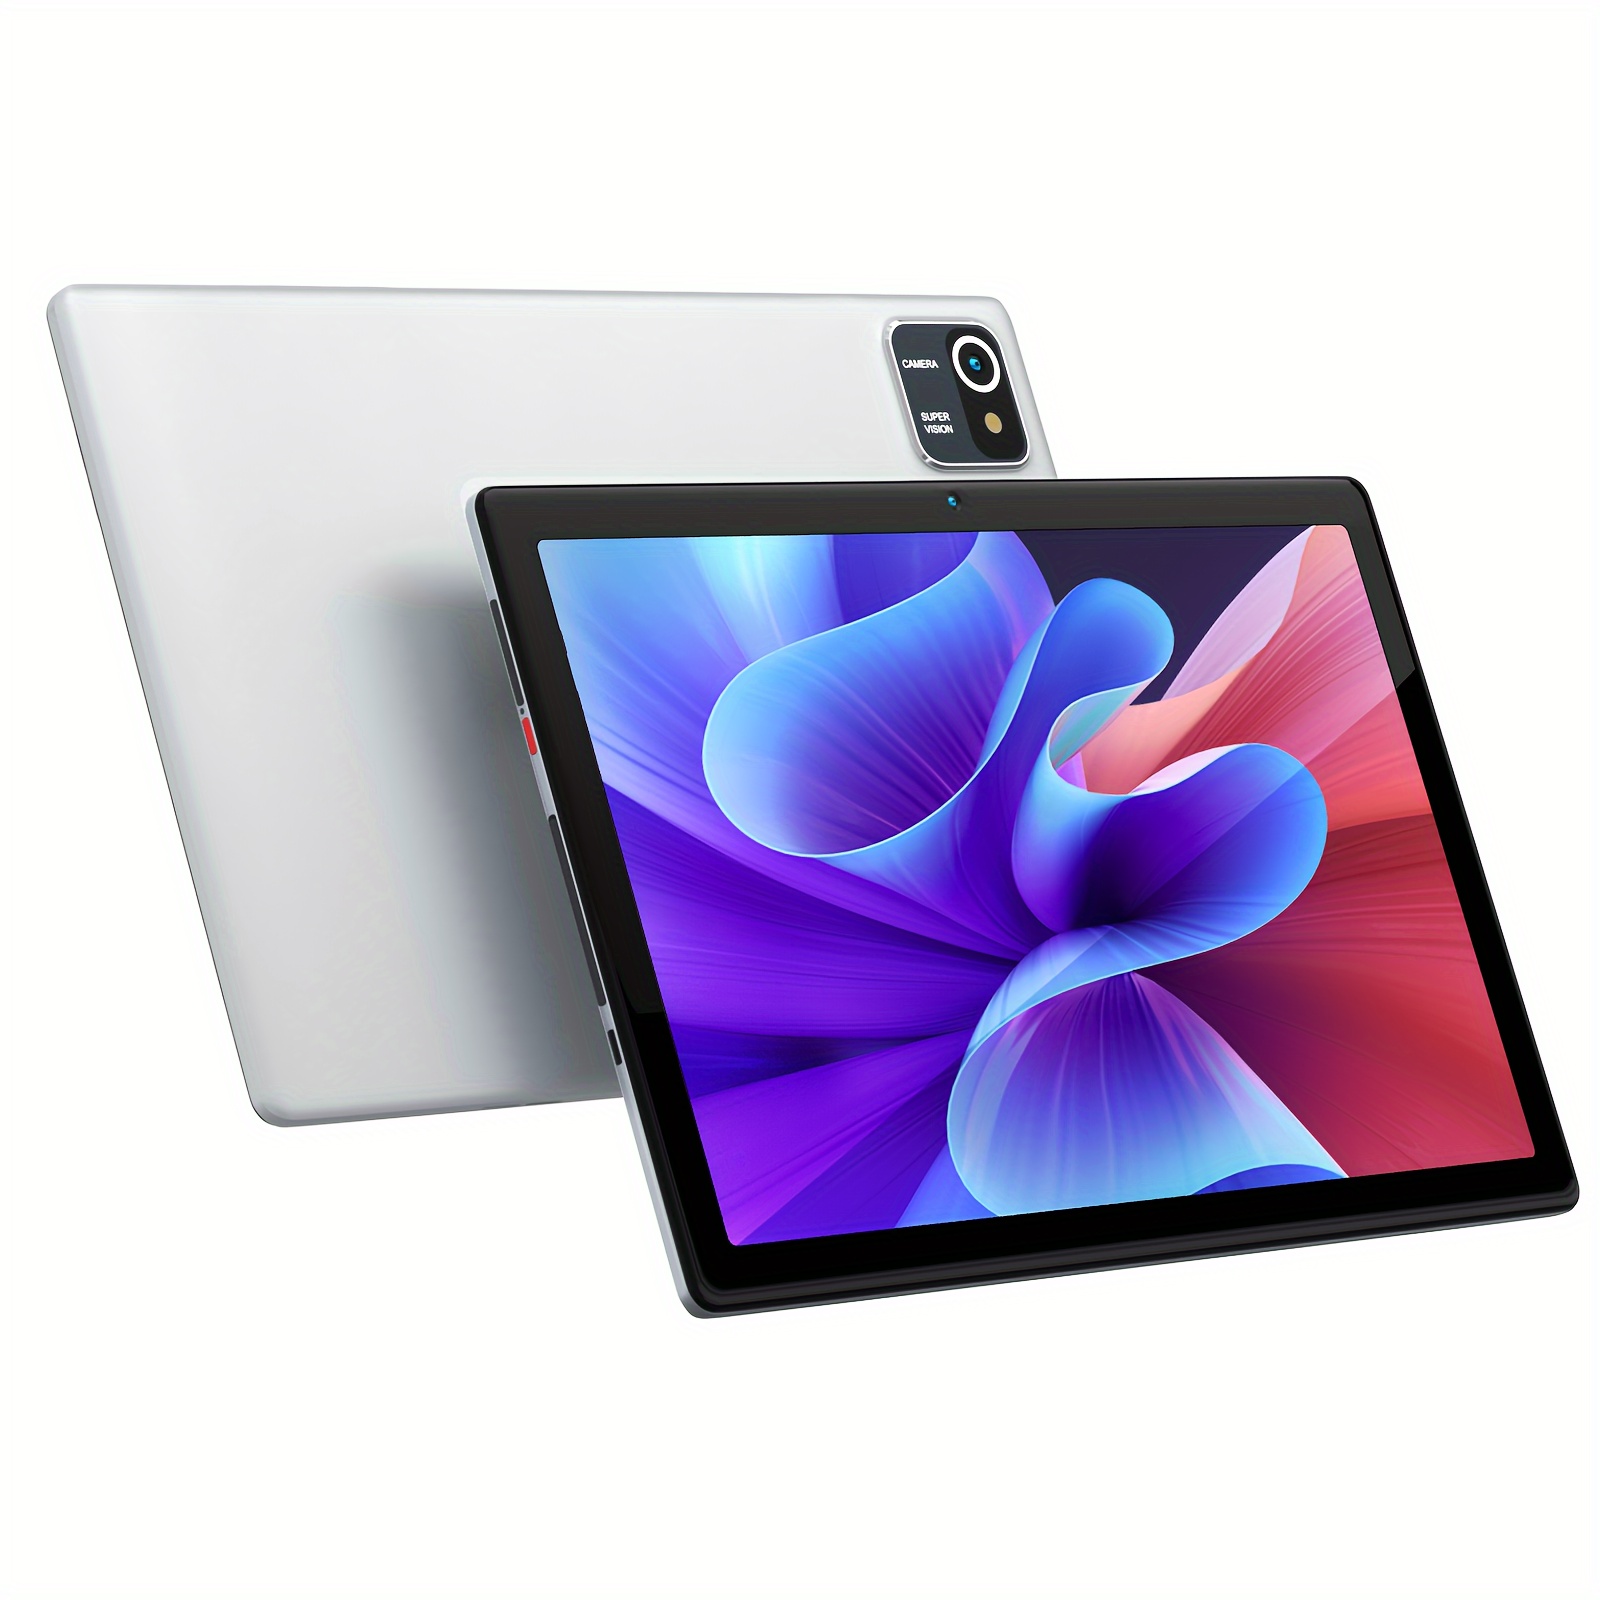 

10 Inch Tablet Android 13 Tablet, Quad Core Tablet, 2gb Memory, 64gb Rom, 128gb Expansion, 5000mah, 1280x800 Hd Touch Screen, 5 Million Pixels+8 Million Pixels, Wifi, Dual Camera